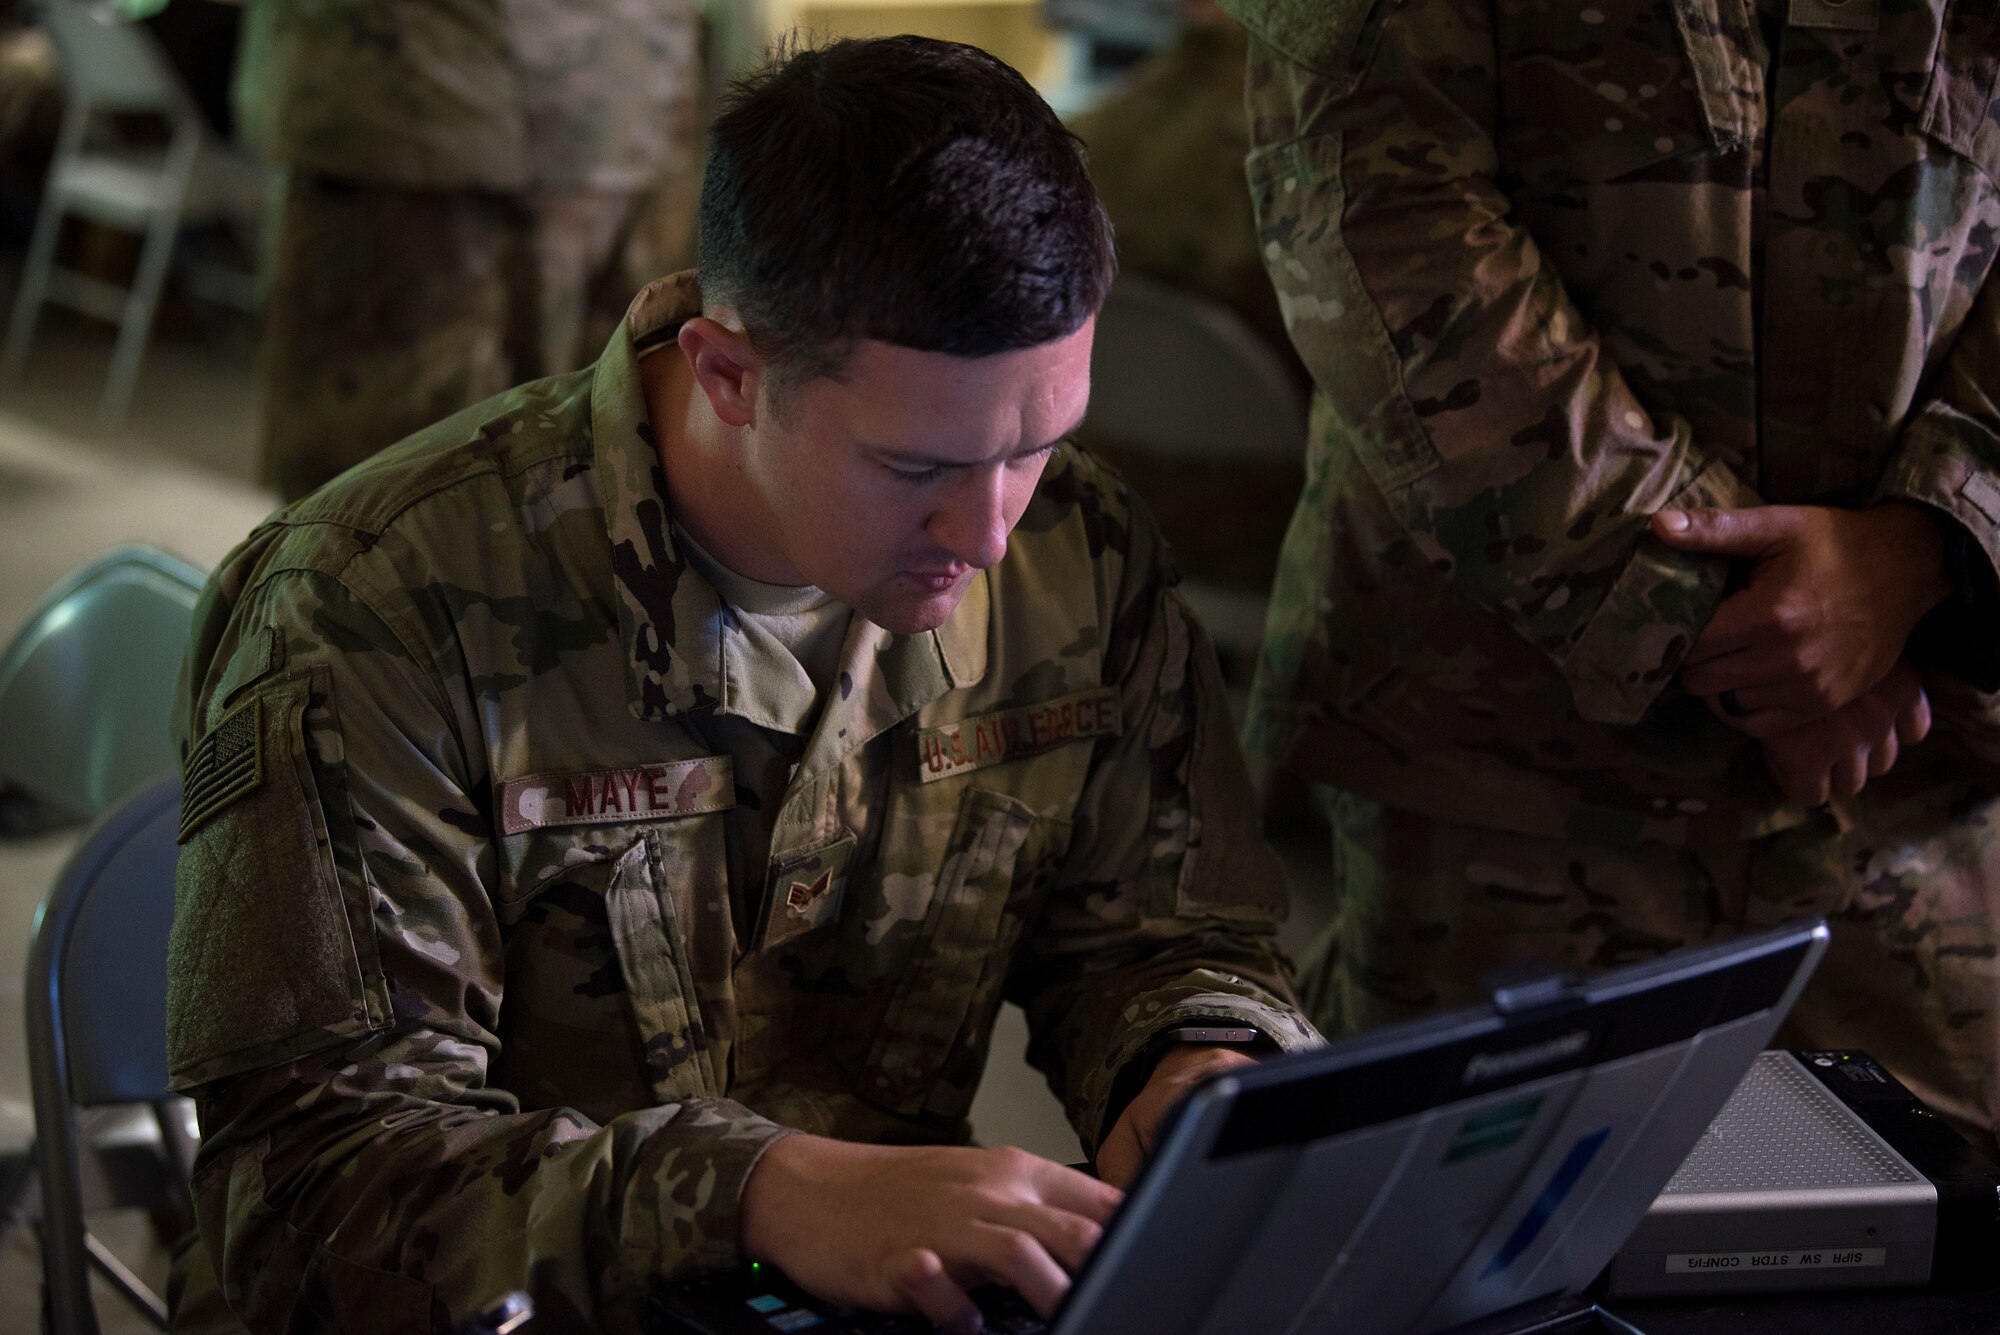 U.S. Air Force Staff Sgt. Sean May, 290th Joint Communication Support Squadron cyber transport systems specialist from MacDill Air Force Base, operates a Joint Communications Support Element Joint Building Blocks (JBLOX) system at the Florida National Guard Armory tactical operations center in Panama City, Fla., Oct. 13, 2018. JCSS, a Florida Air National Guard unit, and JCSE, part of U.S. Transportation Command, train together year-round at MacDill, driving their success as a Total Force team rapidly restoring communications capabilities for Hurricane Michael disaster relief efforts. (U.S. Air Force photo by 2nd Lieutenant Allison Mills)